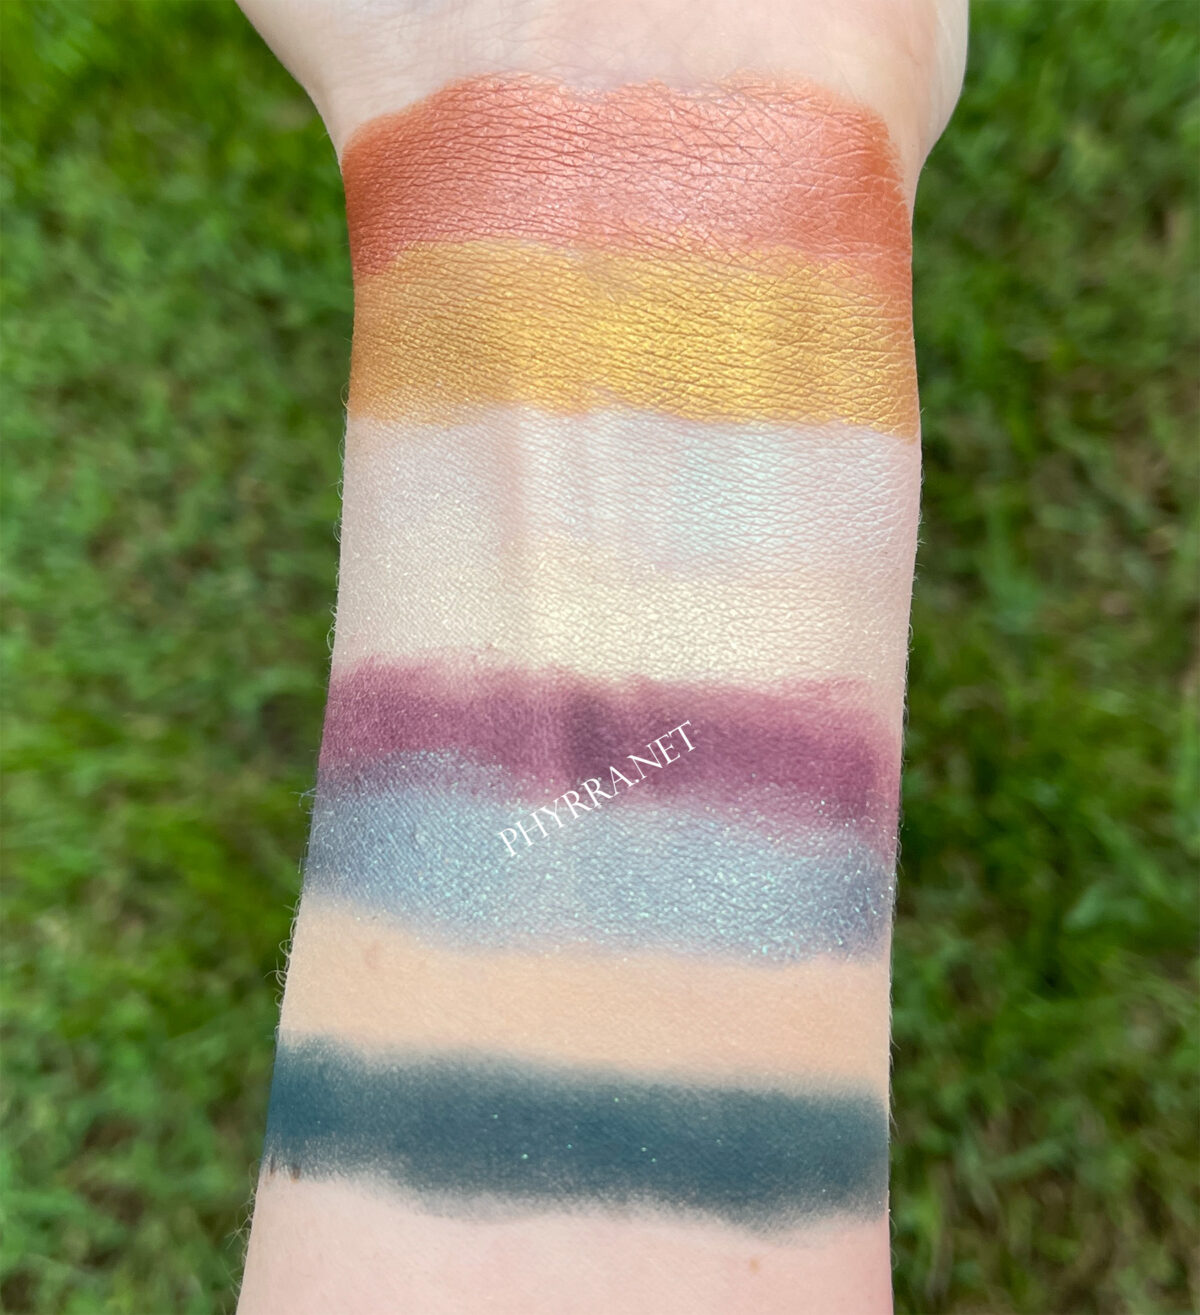 Lime Crime Prelude Chroma Swatches